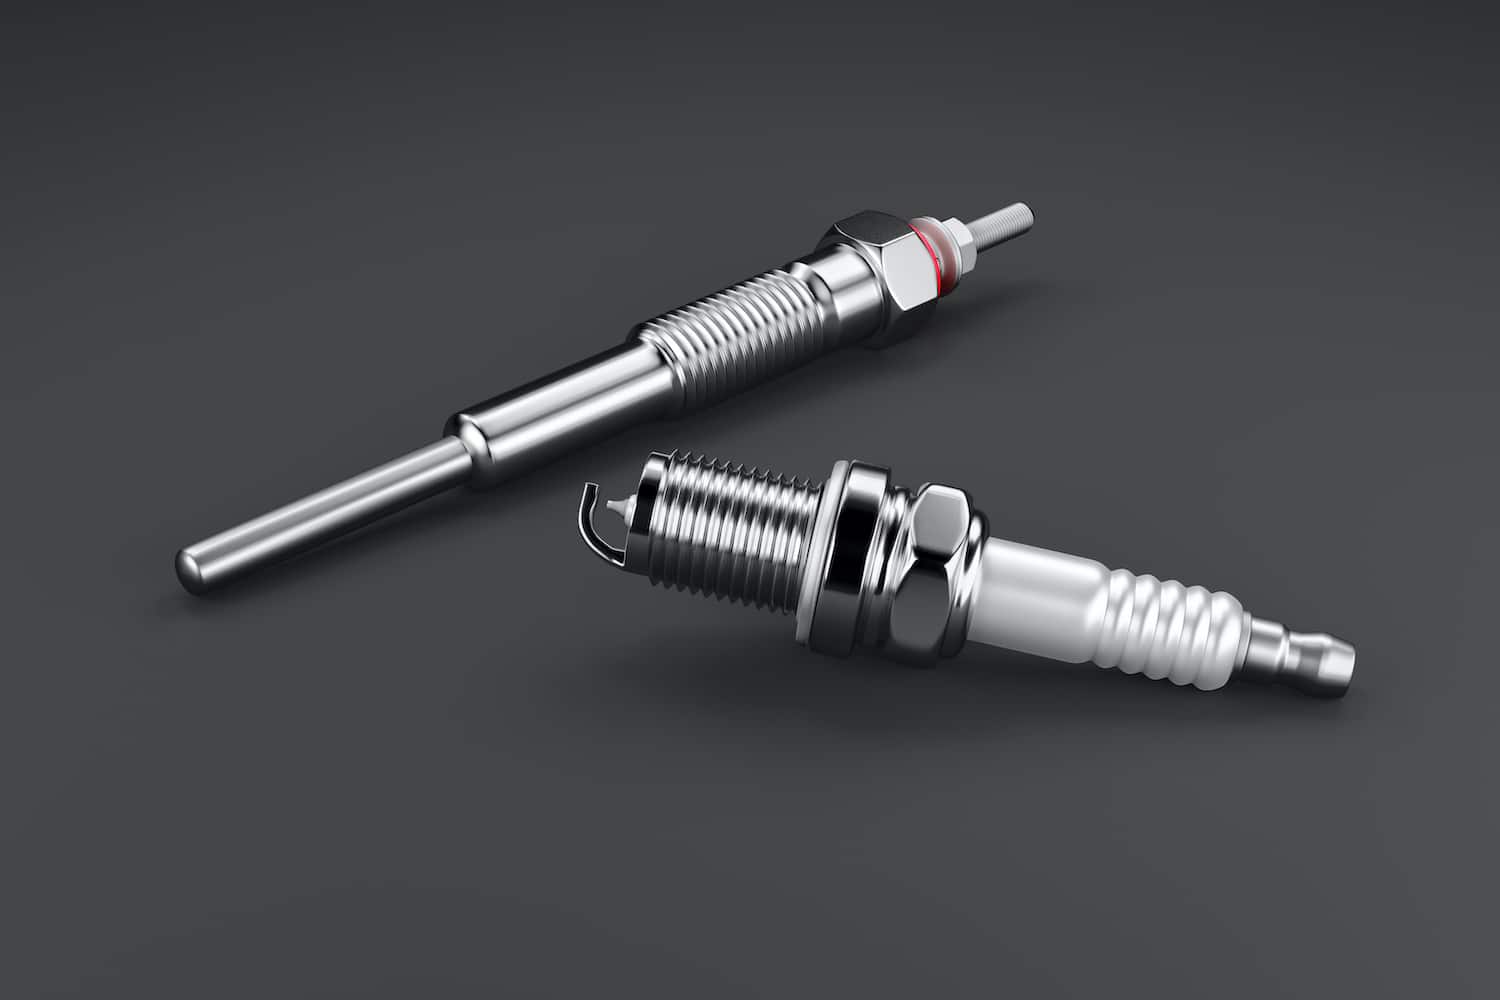 What Are The Differences Between Glow Plugs And Spark Plugs